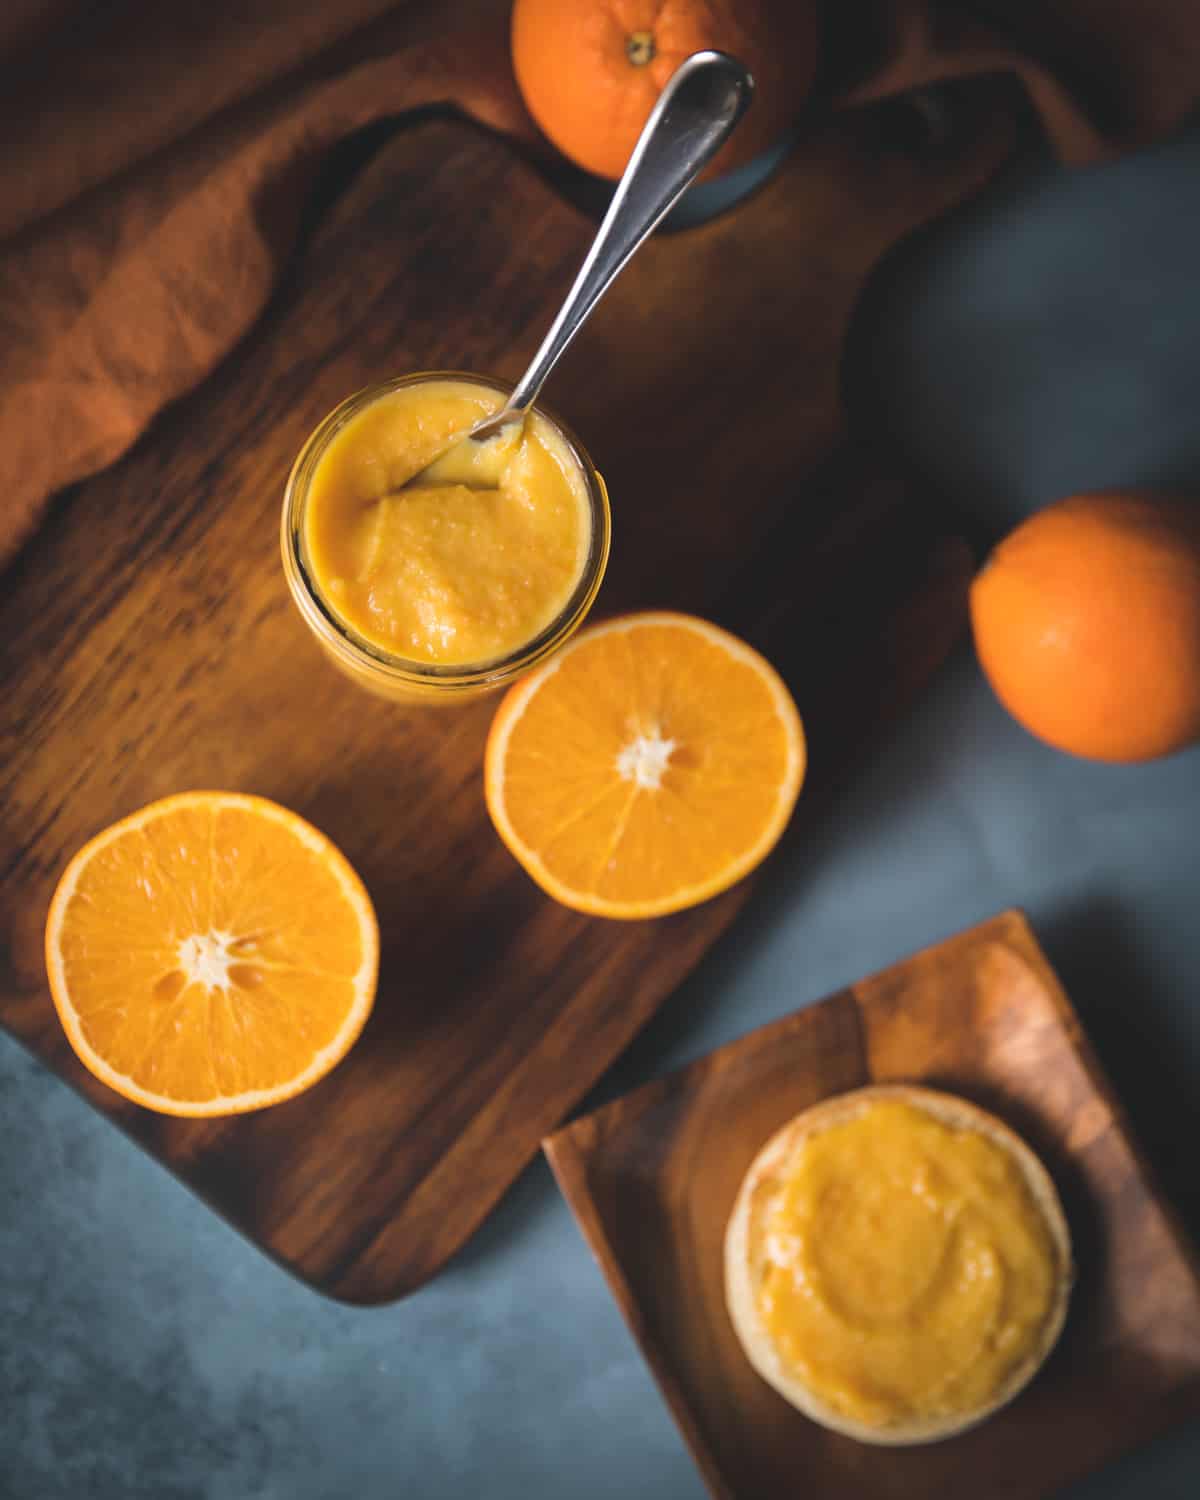 Top view of a jar of orange curd with a spoon, surrounded by halved and whole oranges on a wooden cutting board.